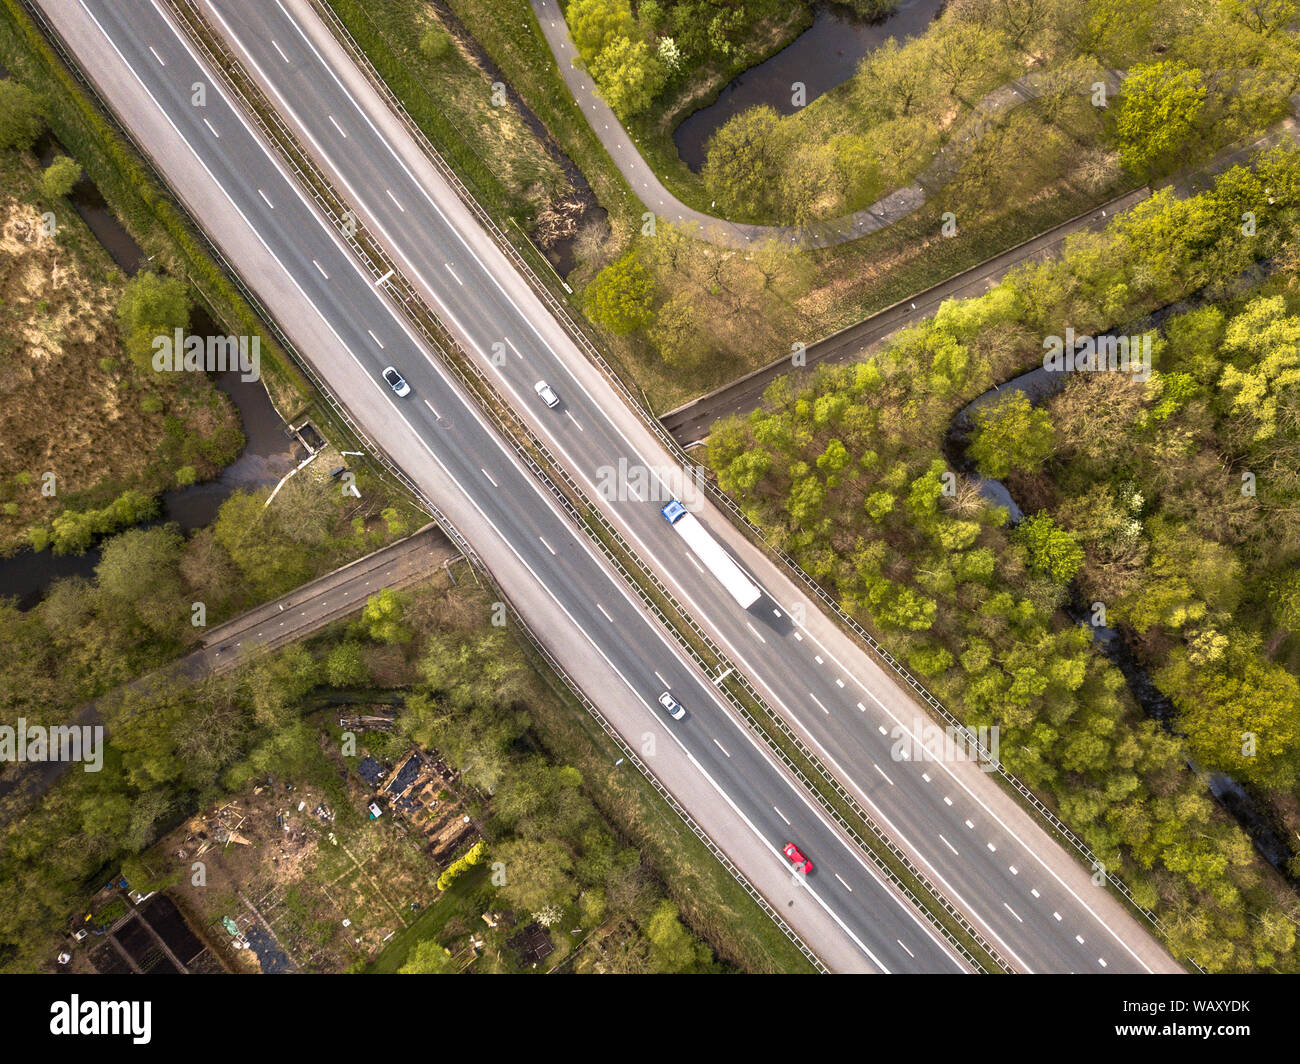 Aerial view of four lane motorway with emergency lane and moderate ...